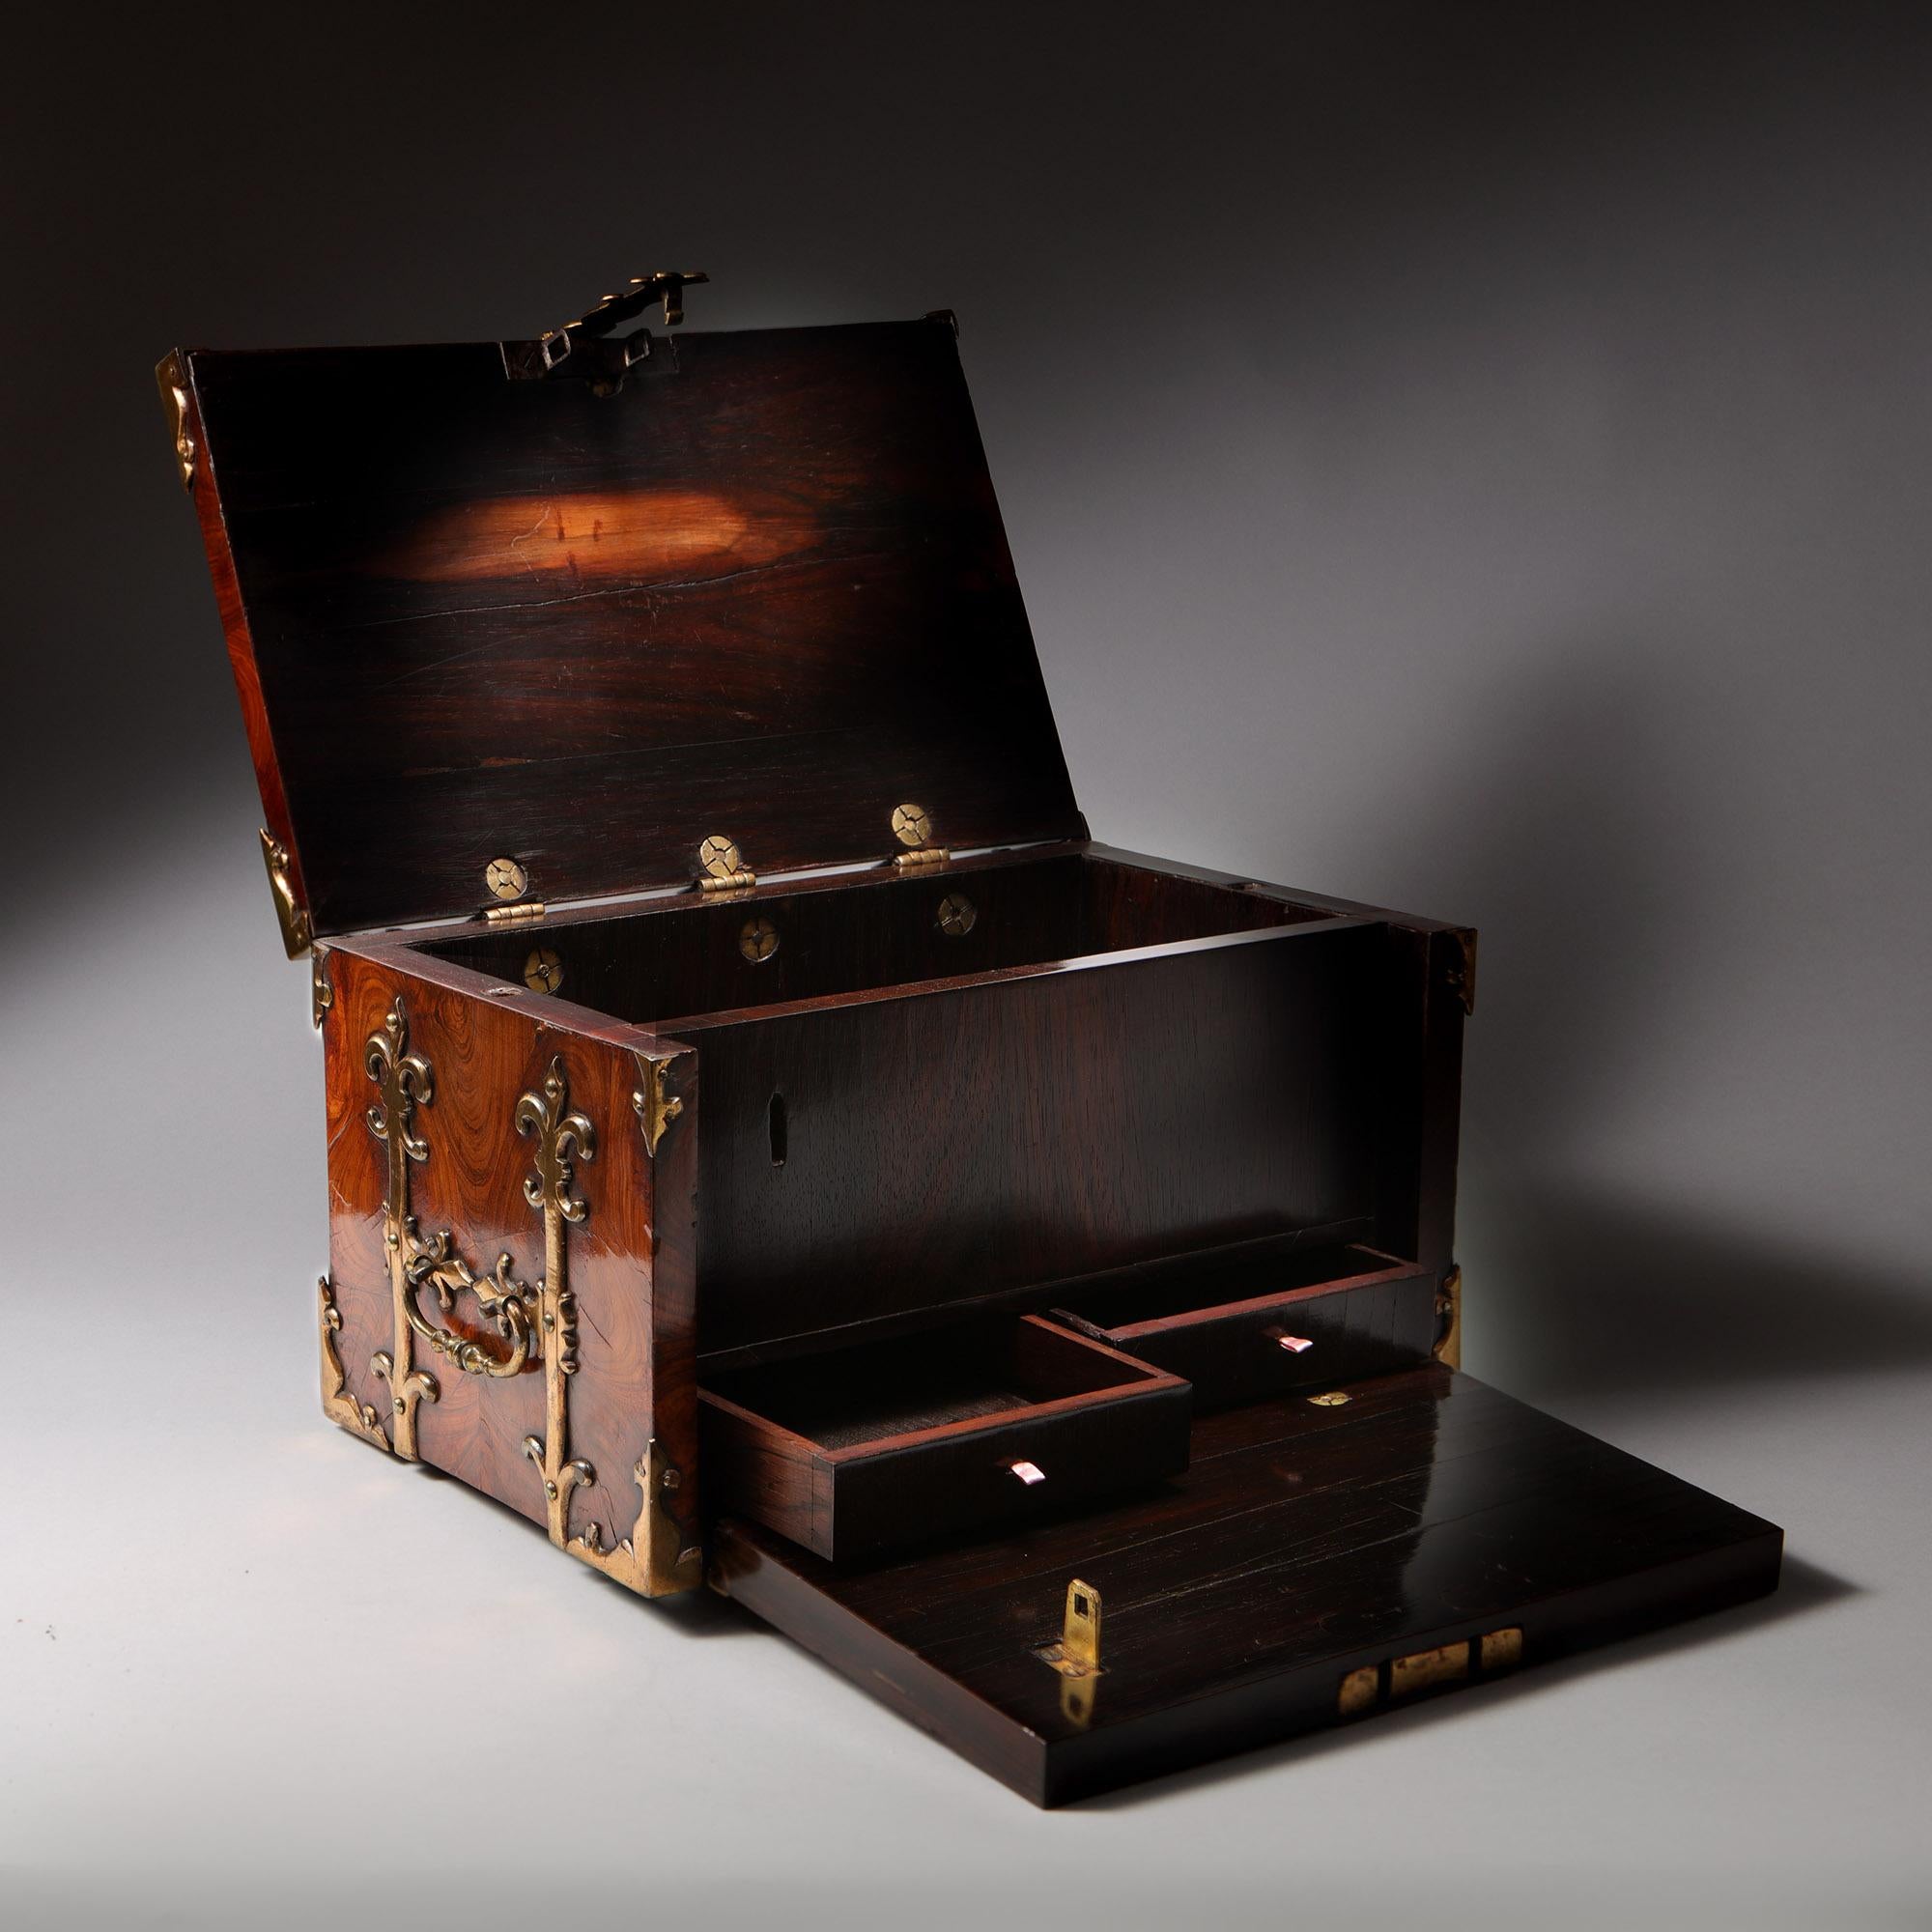 English A Fine 17th C. William and Mary Kingwood Strongbox or Coffre Fort, Circa 1690 For Sale